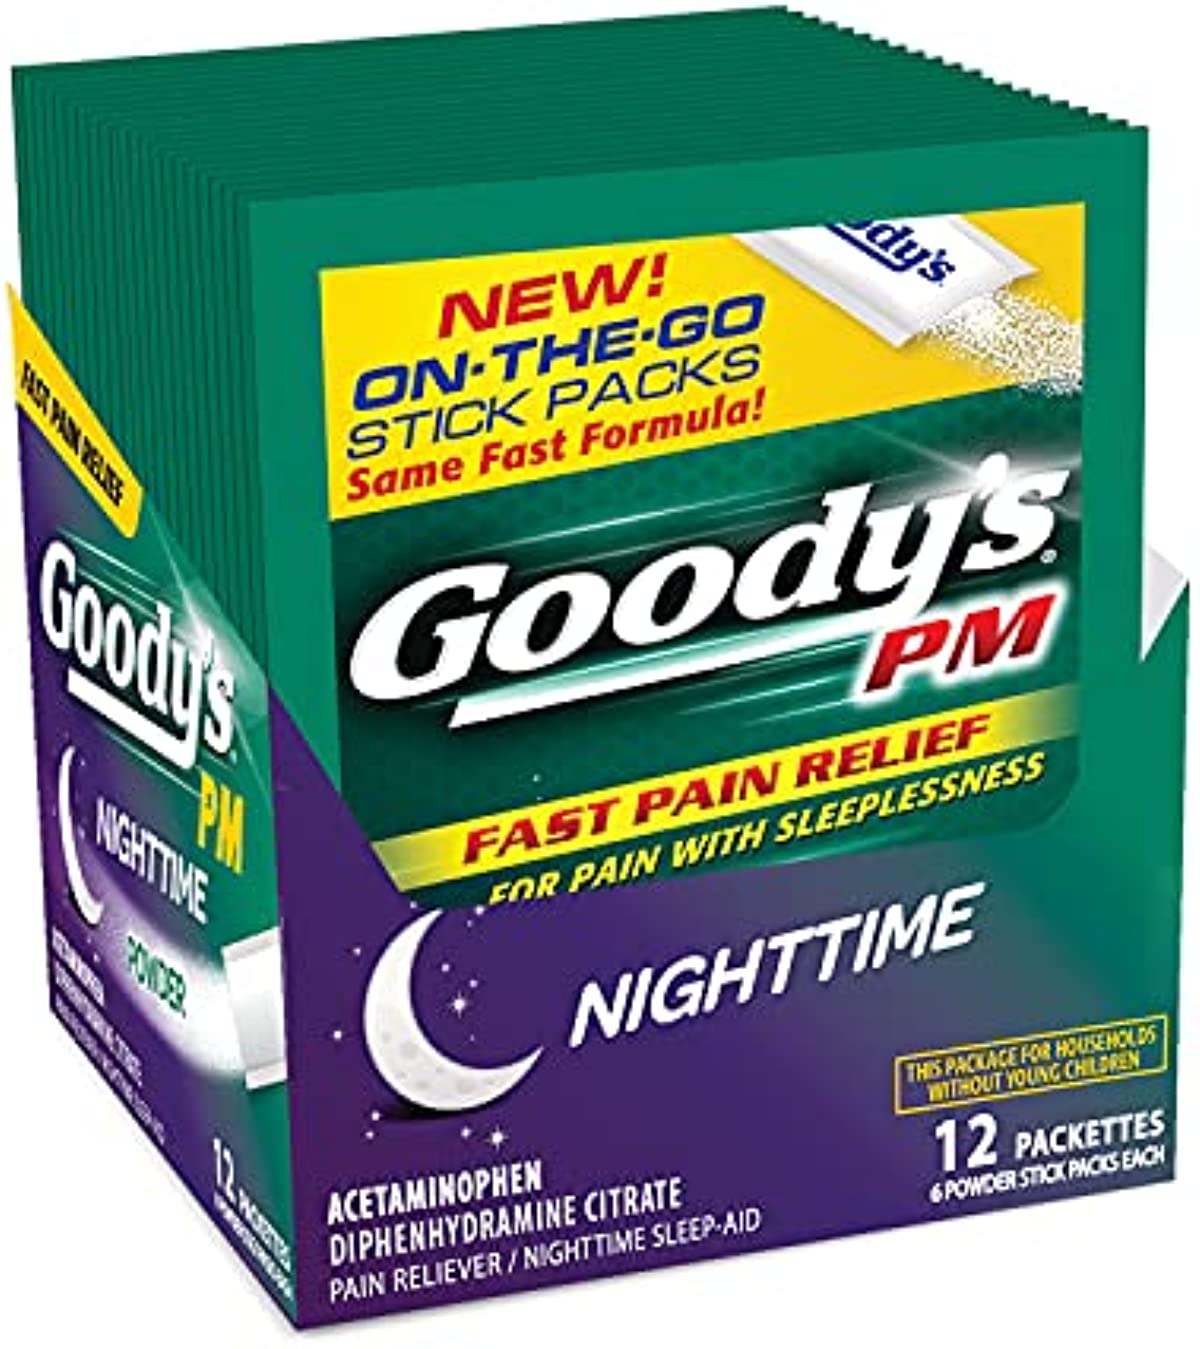 Goody\'s PM Nighttime Powder, Dissolve Packs for Pain with Sleeplessness, 6 Individual Packets, 12 Pack